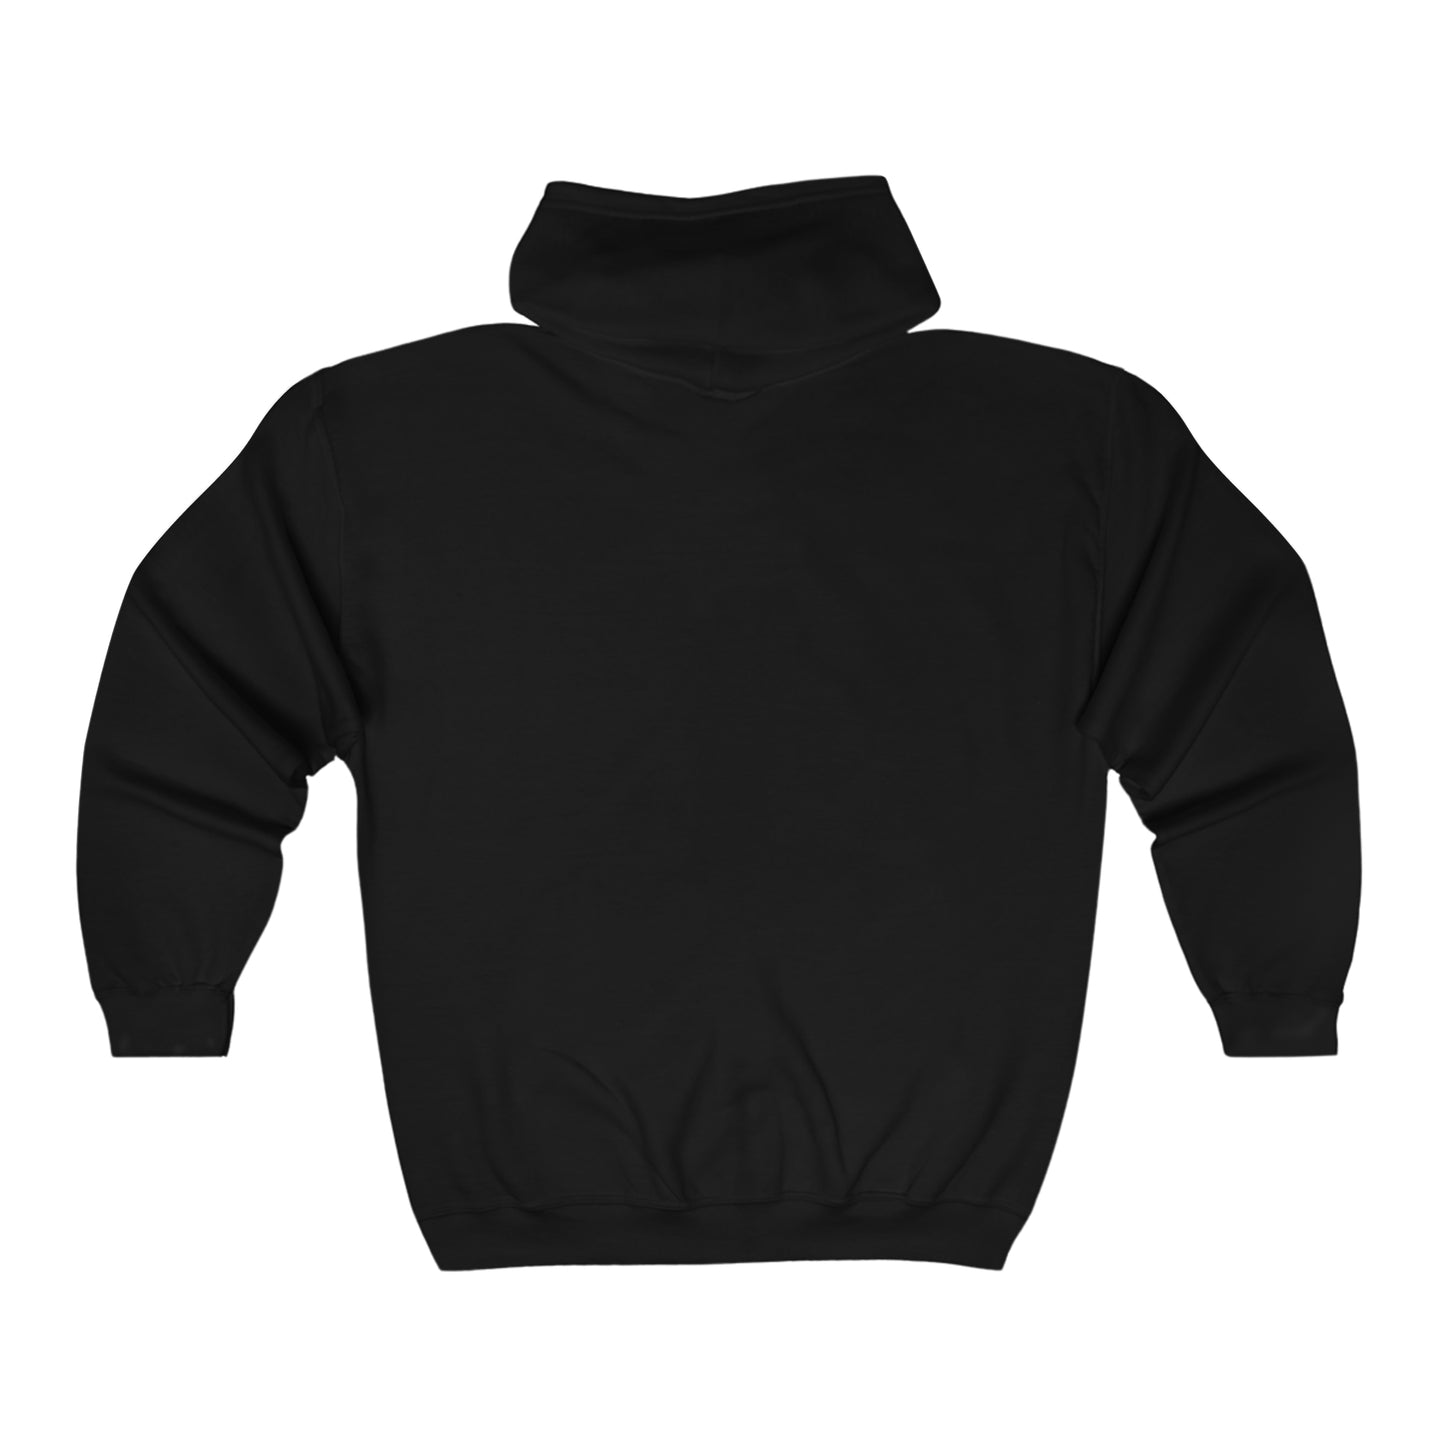 A Piece Of Crap Full Zip Whimsy Hooded Sweatshirt